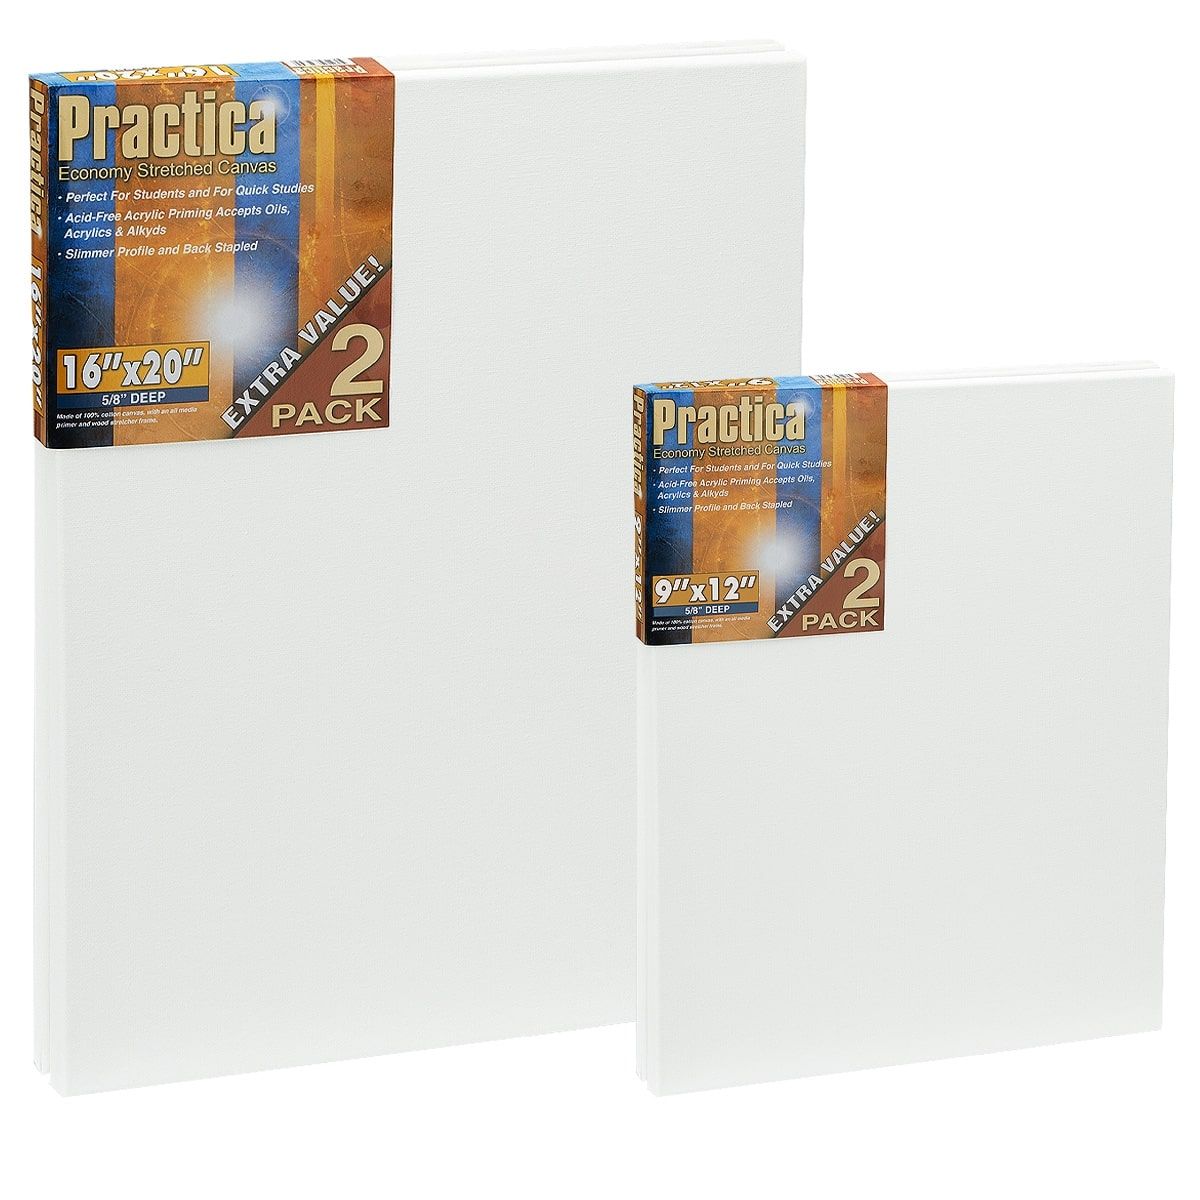 Classic Stretched Canvas, Black, 12 x 12 - Pack of 8